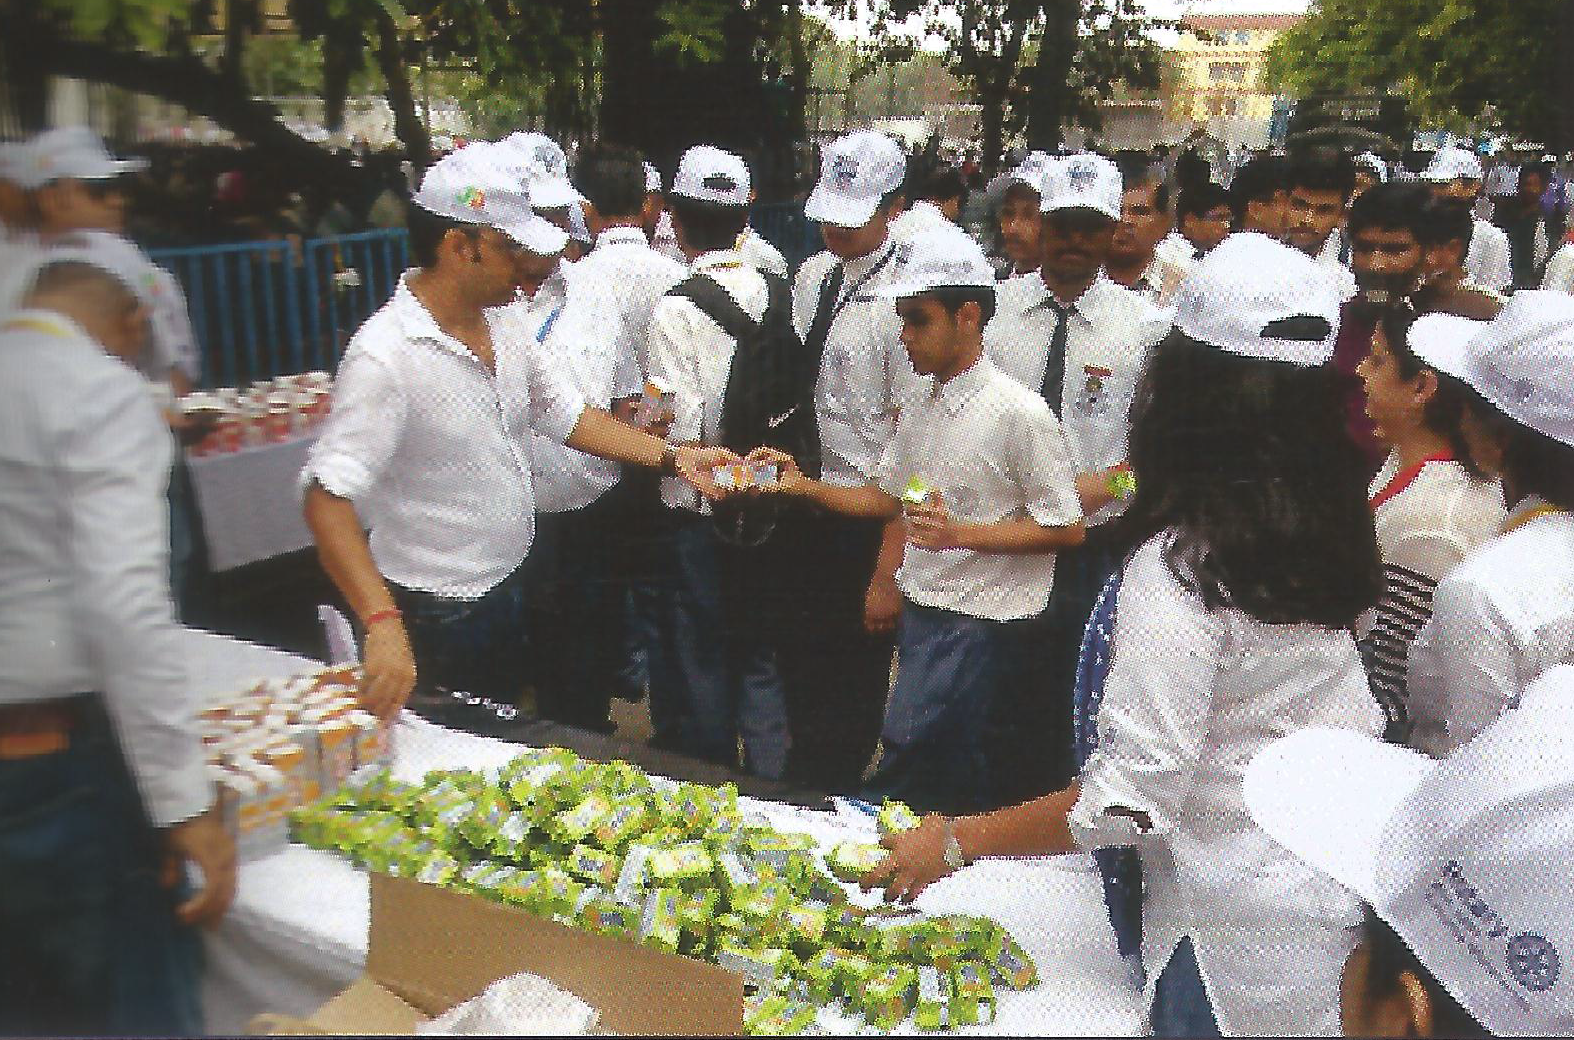 Distribution of biscuit and Juice after Canonization